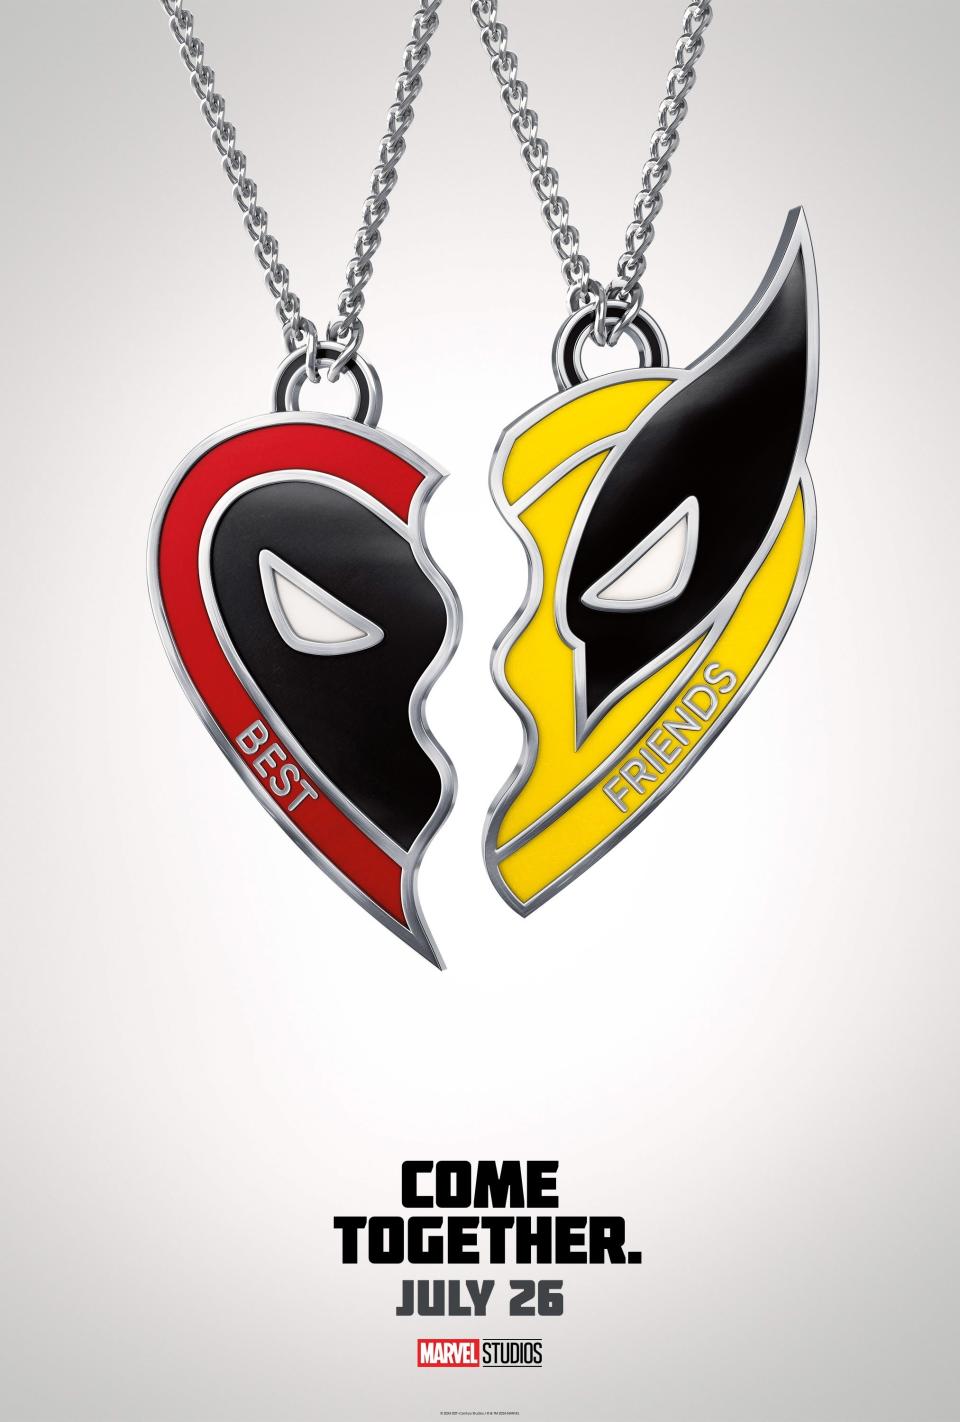 Two necklaces with half-heart pendants featuring Deadpool and Spider-Man logos. Text: "Come Together. July 26. Marvel Studios."